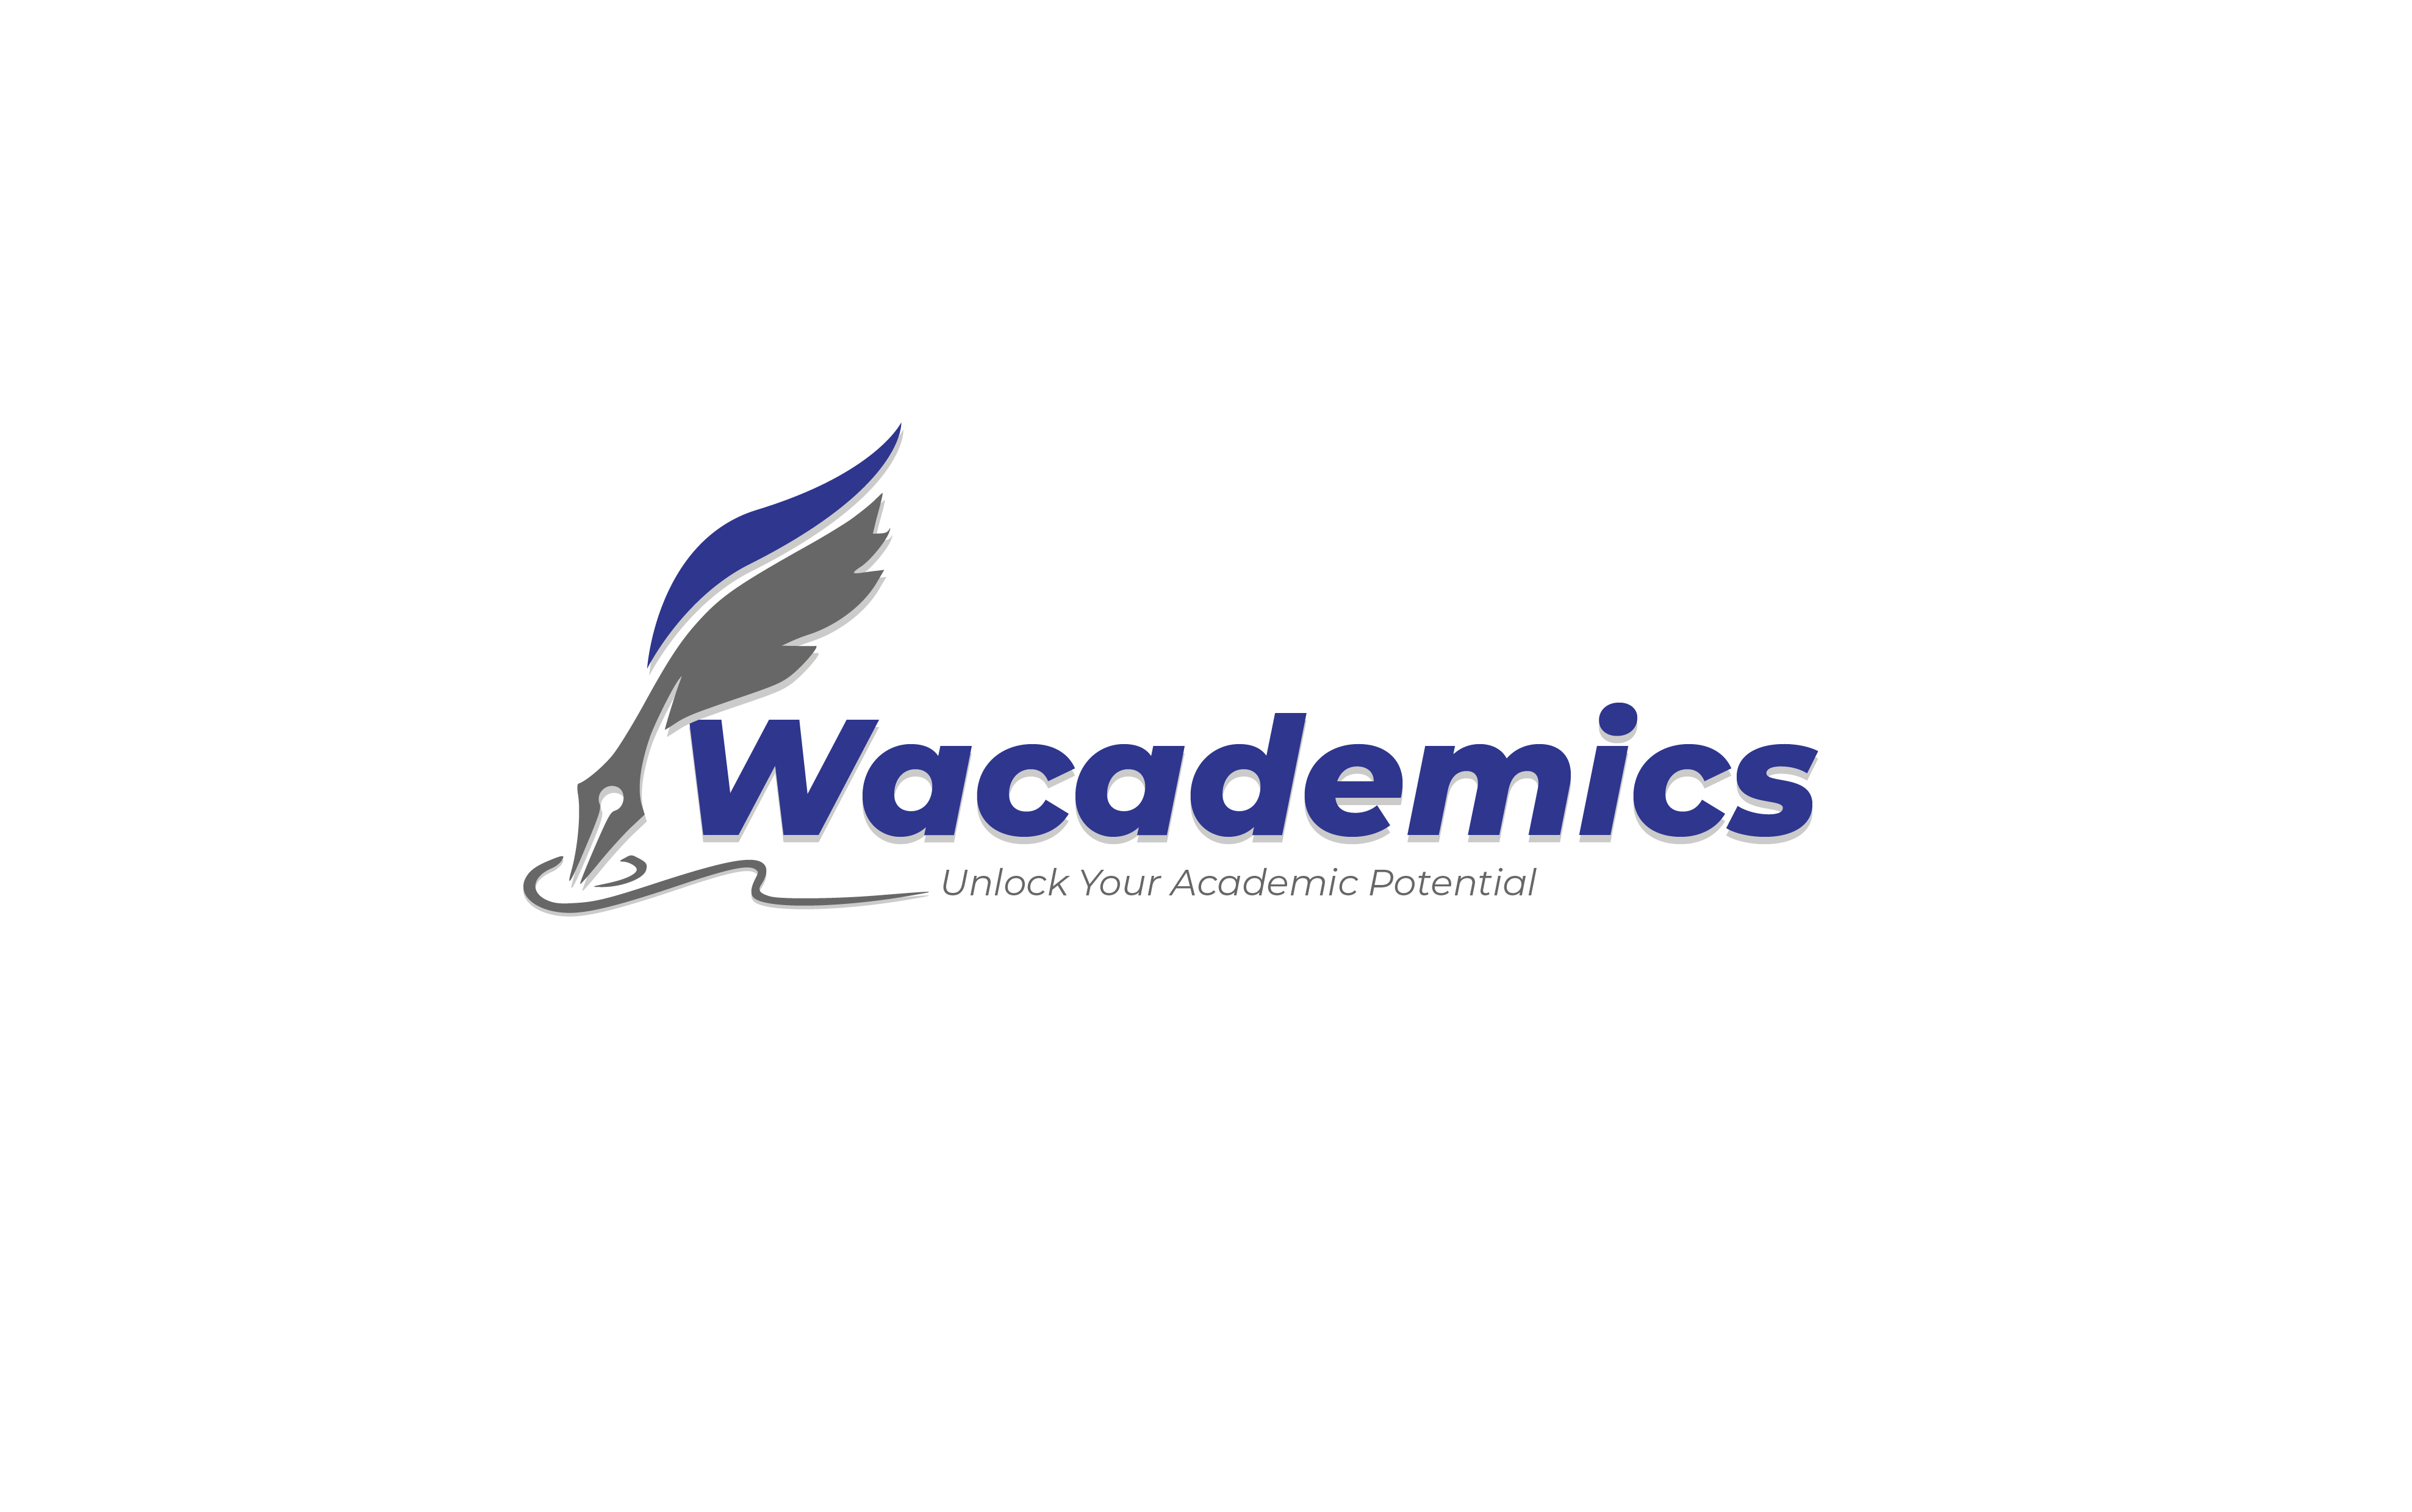 Wacademics Logo Designer in Nairobi Kenya. The Best Logo Design Company in Nairobi, Kenya, Kampala, Uganda, Dar es Salaam, Kigali, Rwanda, Juba, South Sudan, and Mogadishu, Somalia is Galactik IT. Galactik IT provides corporate, governmental, non-profit, and small- and medium-sized business clients with expert logo graphics design services. With an expert working on your brand visuals at each stage, Galactik IT offers a logo design thorough process in Nairobi, Kenya that smoothly takes you from planning to post-launch. Galactik IT never skimped on quality. Galactik IT builds beautifully made, effective logo by by hand. Logo, company profile, business card, letterhead, brochure, social media posters, flyers designers in nairobi kenya